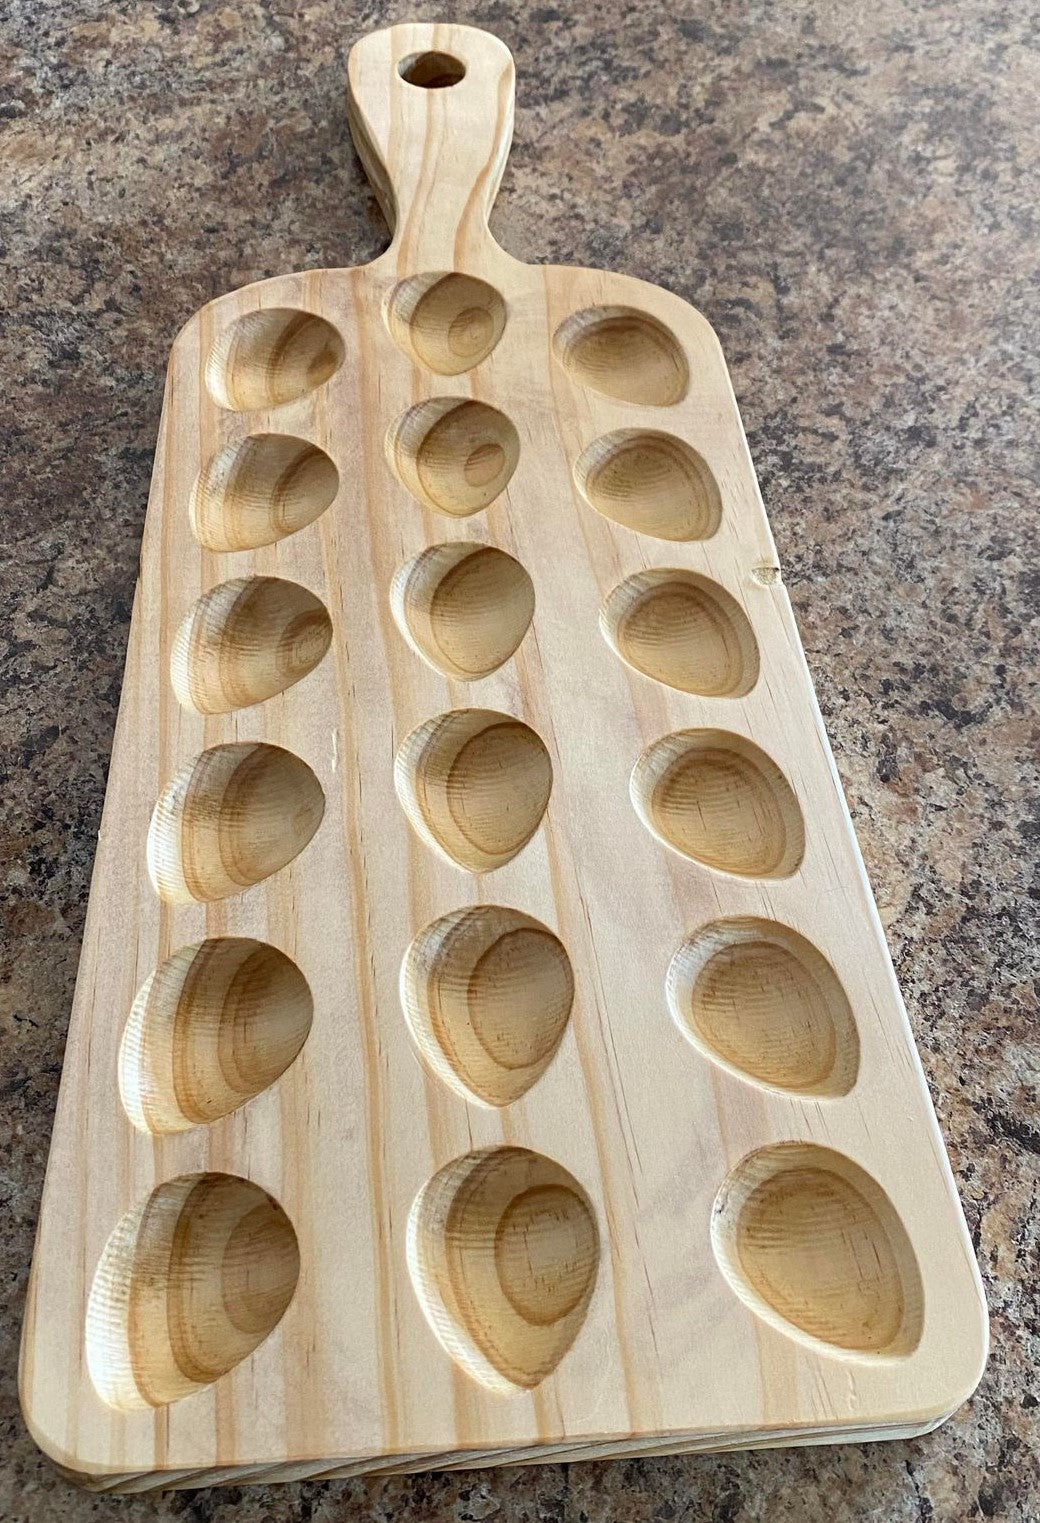 Handmade Deviled Egg Serving Tray (Multiple styles!) Can be Personalized.